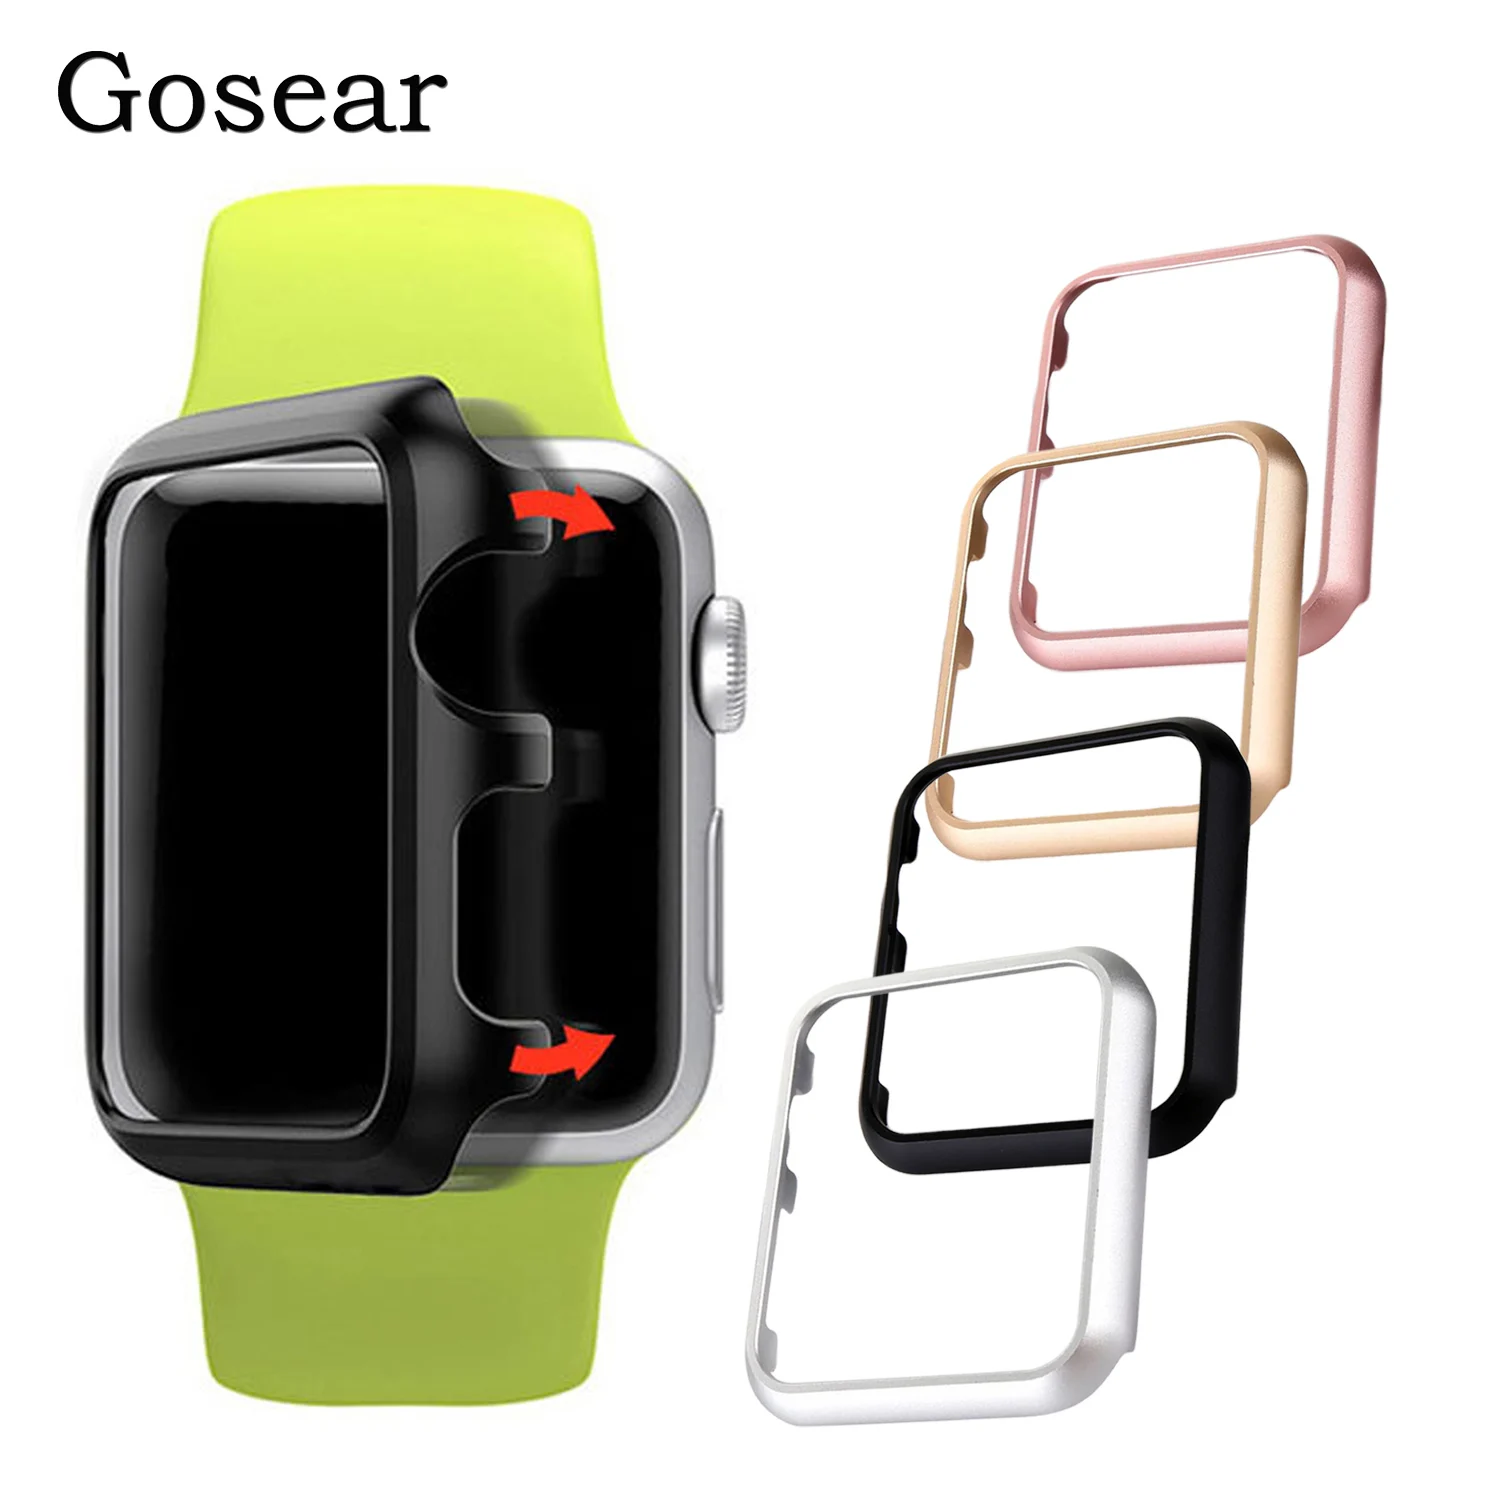 

Besegad Aluminum Alloy Protective Frame Case Cover Shell Skin for Apple Watch iWatch Series 2 3 38mm 42mm Accessories Gadgets